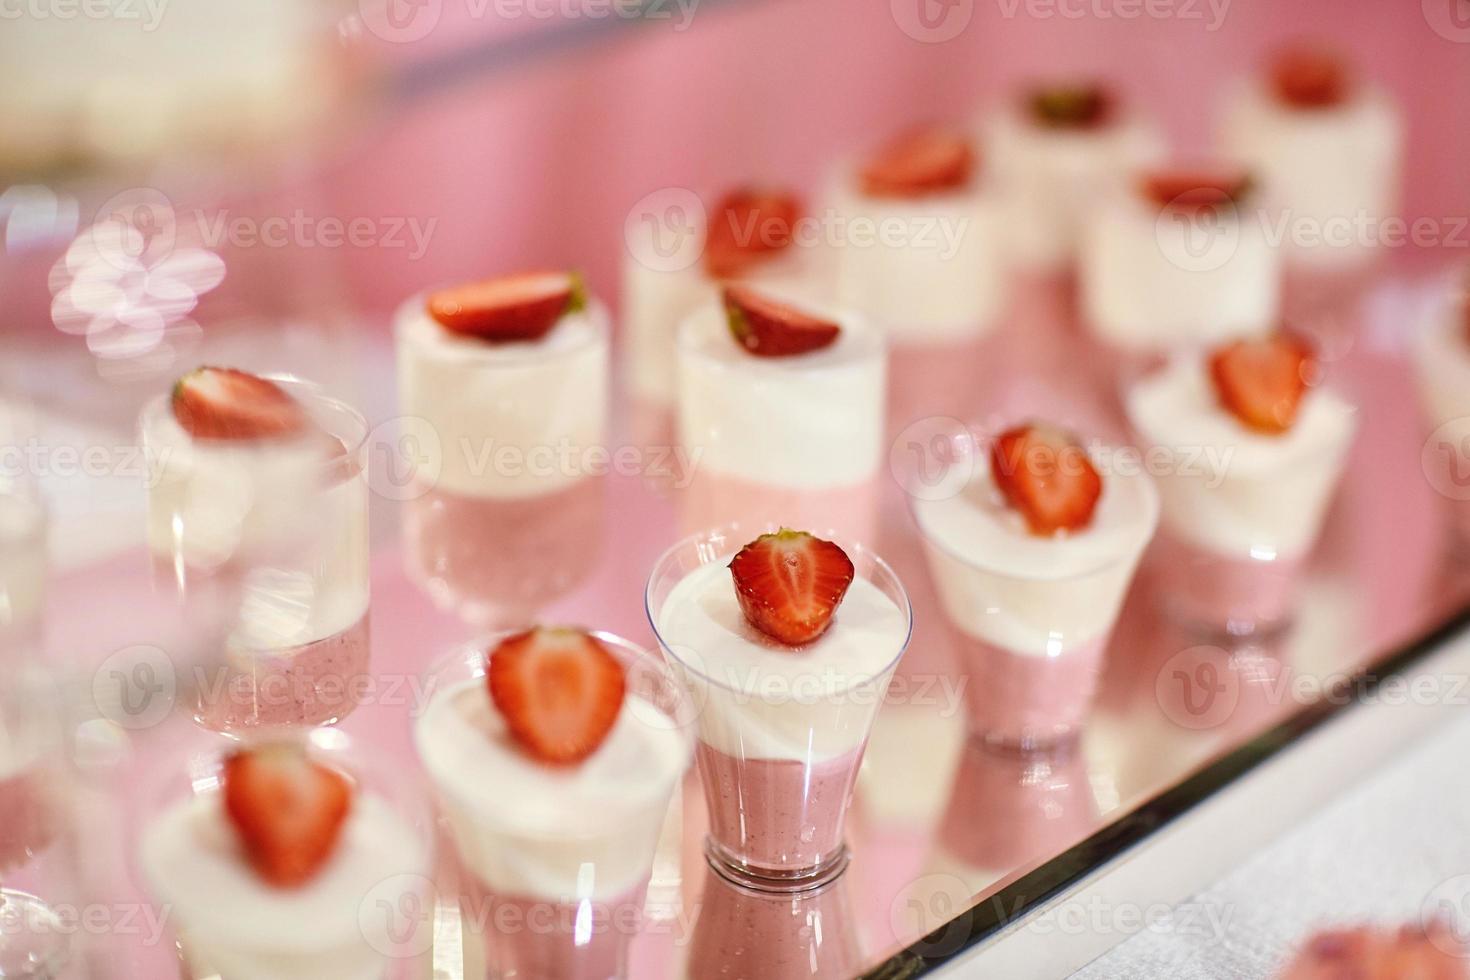 Wedding candy bar with pink and white desserts photo